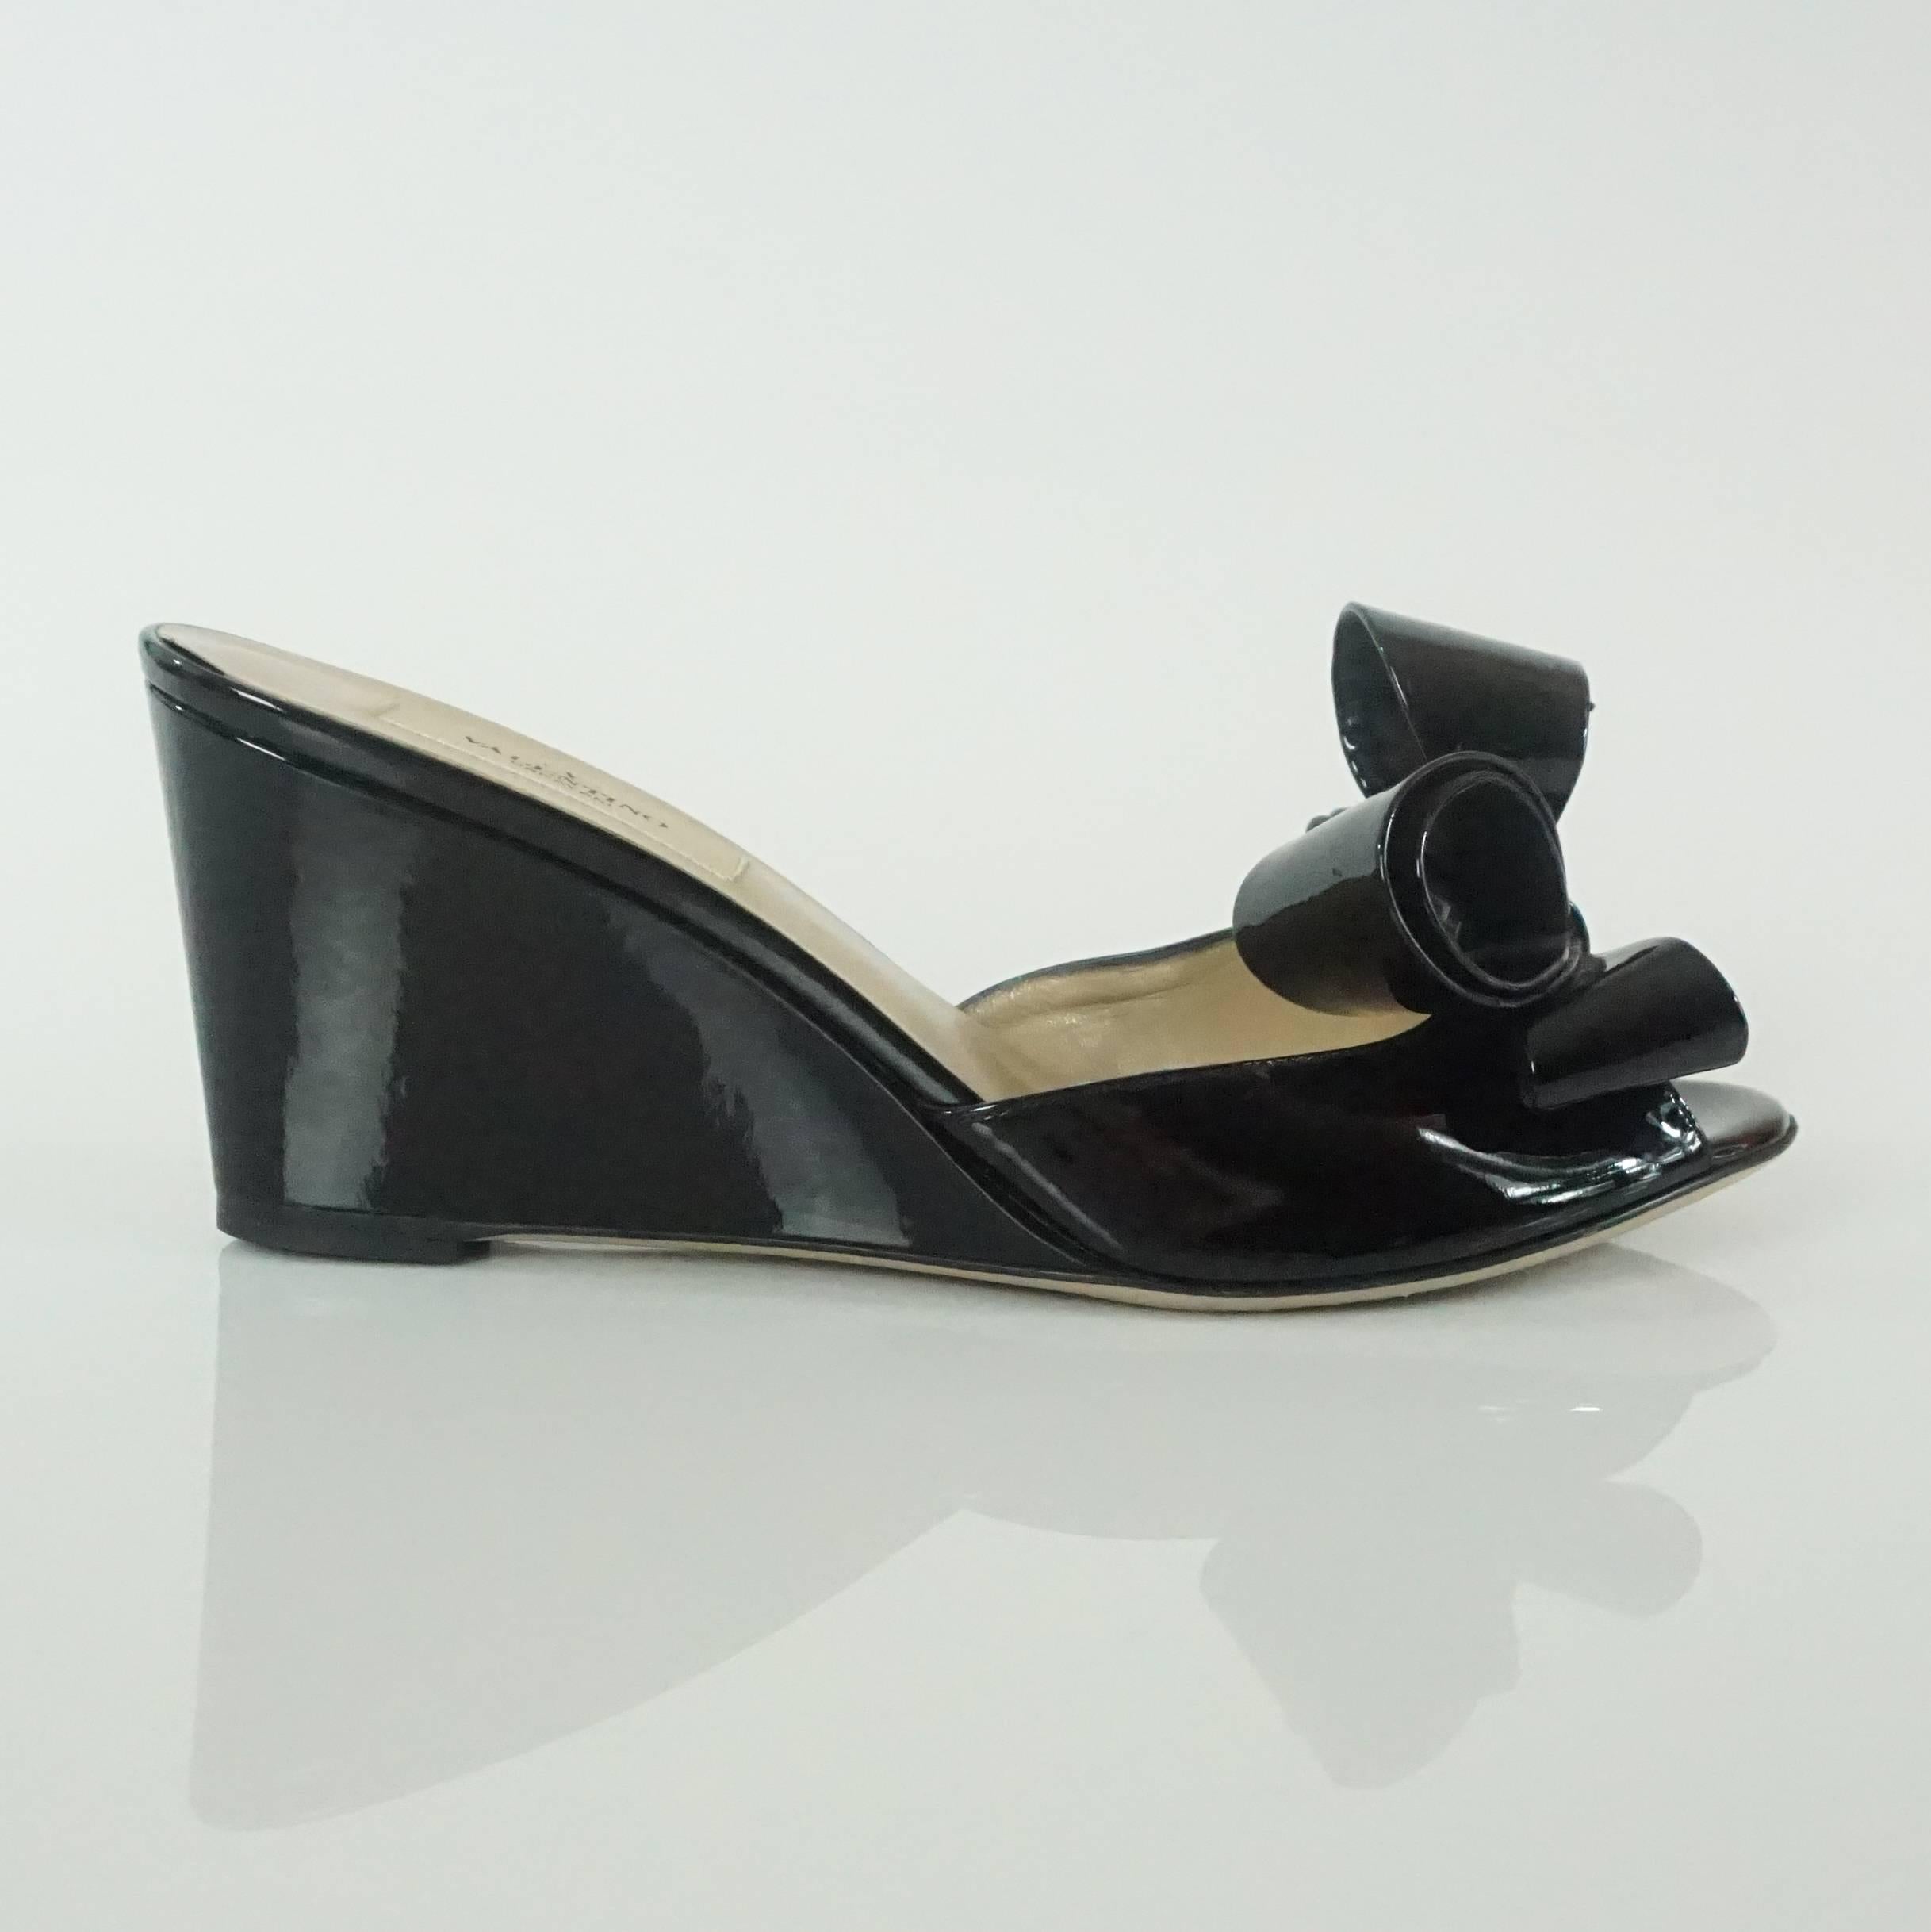 These Valentino black patent bow wedges are a beautiful classic! They are in excellent condition with with minimal wear to the bottom. These wedges come with the duster and box. 

Measurements
Wedge: 3